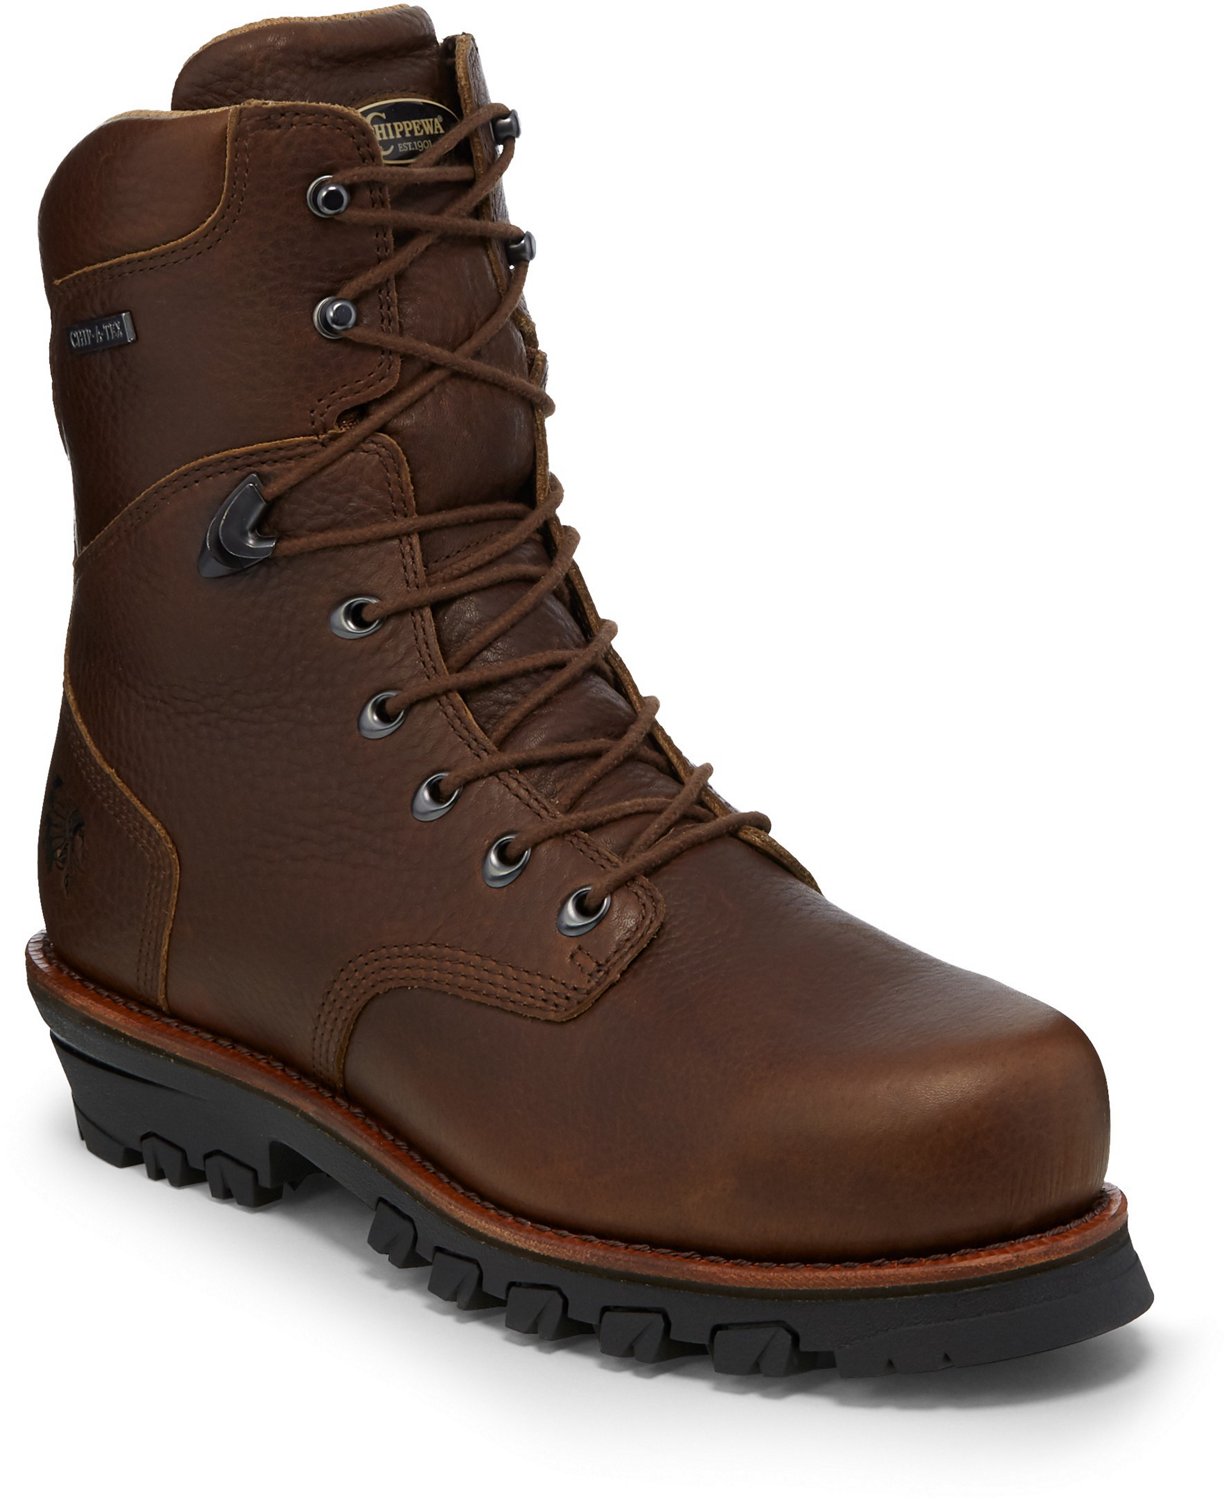 Chippewa Boots Men's The Foreman 9 in EH Composite Toe Lace Up Work ...